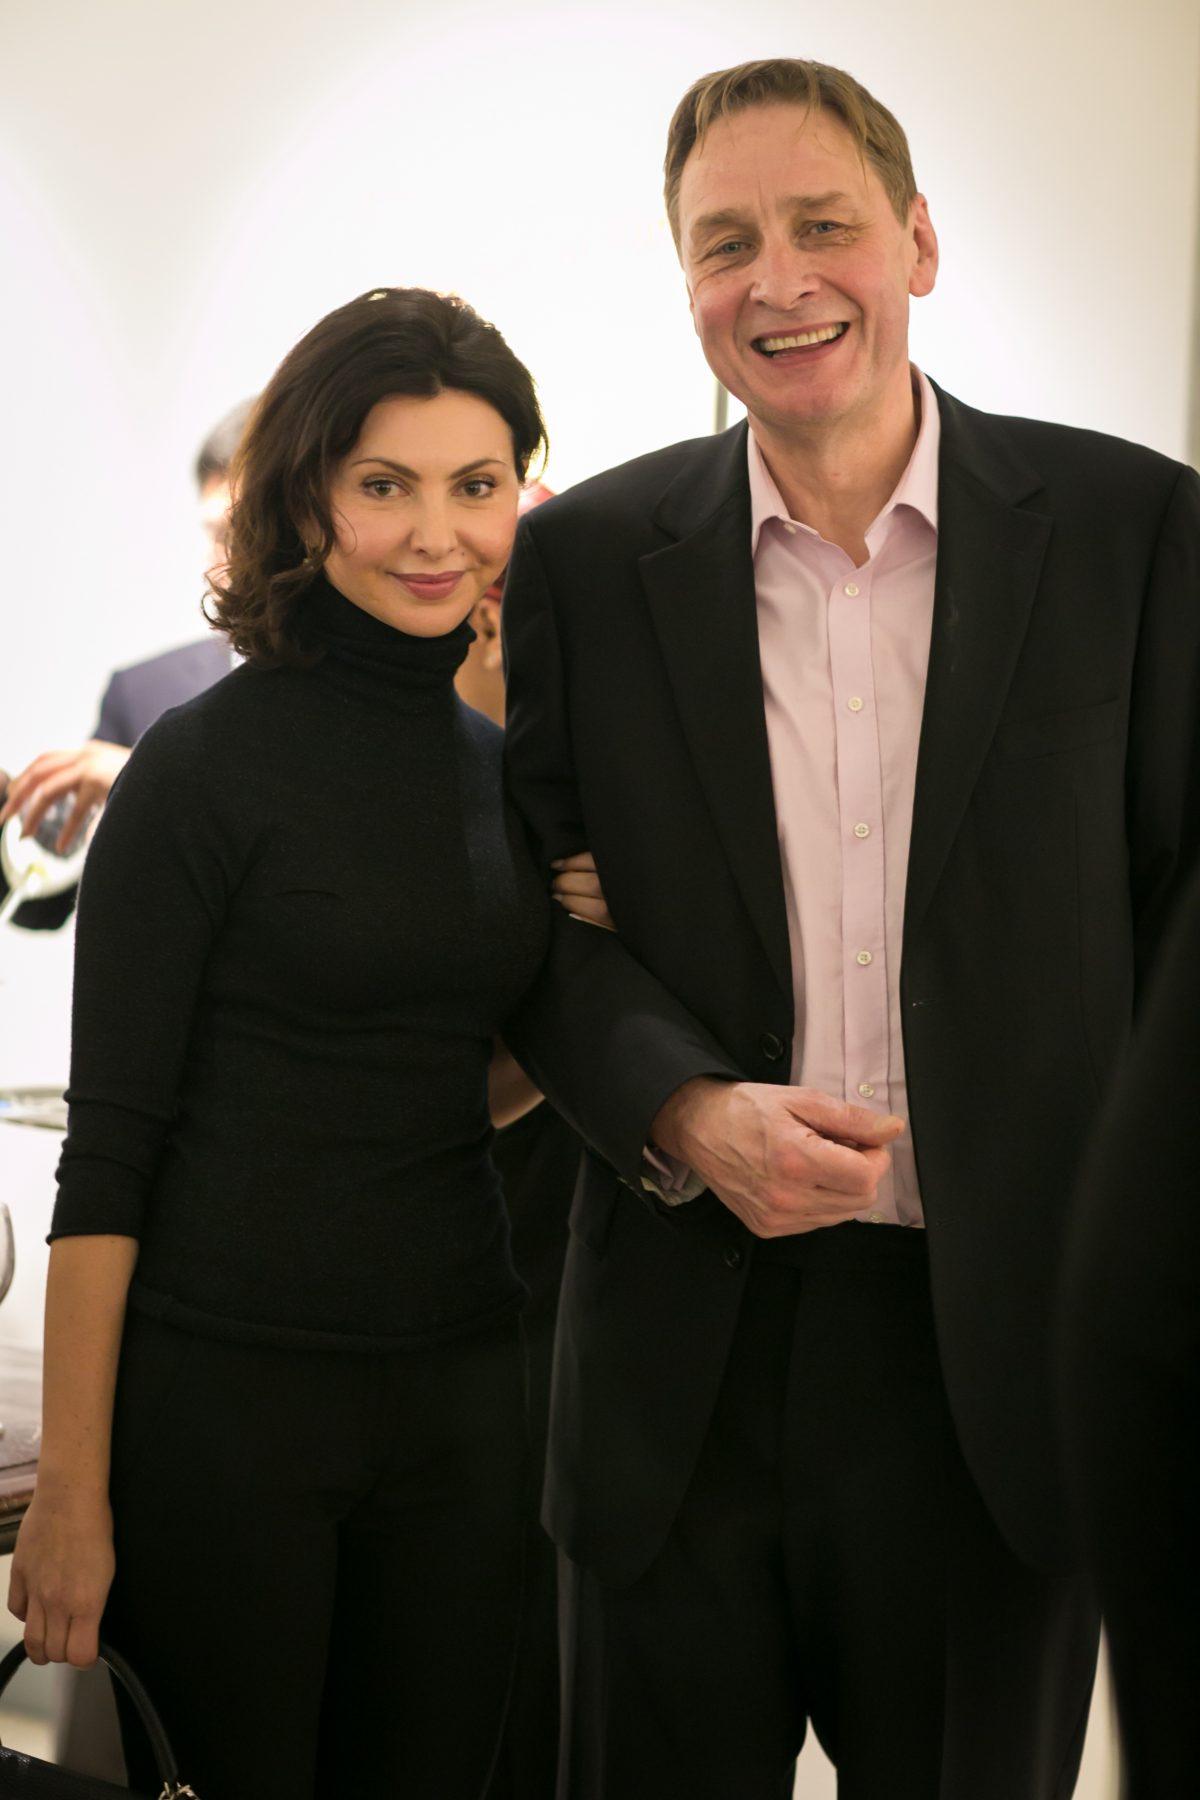 Irina Knaster, founder of Aspect Foundation, and speaker Stephen Johnson during intermission at the "Romantic Vienna" concert at the Italian Academy at Columbia University on Jan. 26, 2016. (Benjamin Chasteen/The Epoch Times)